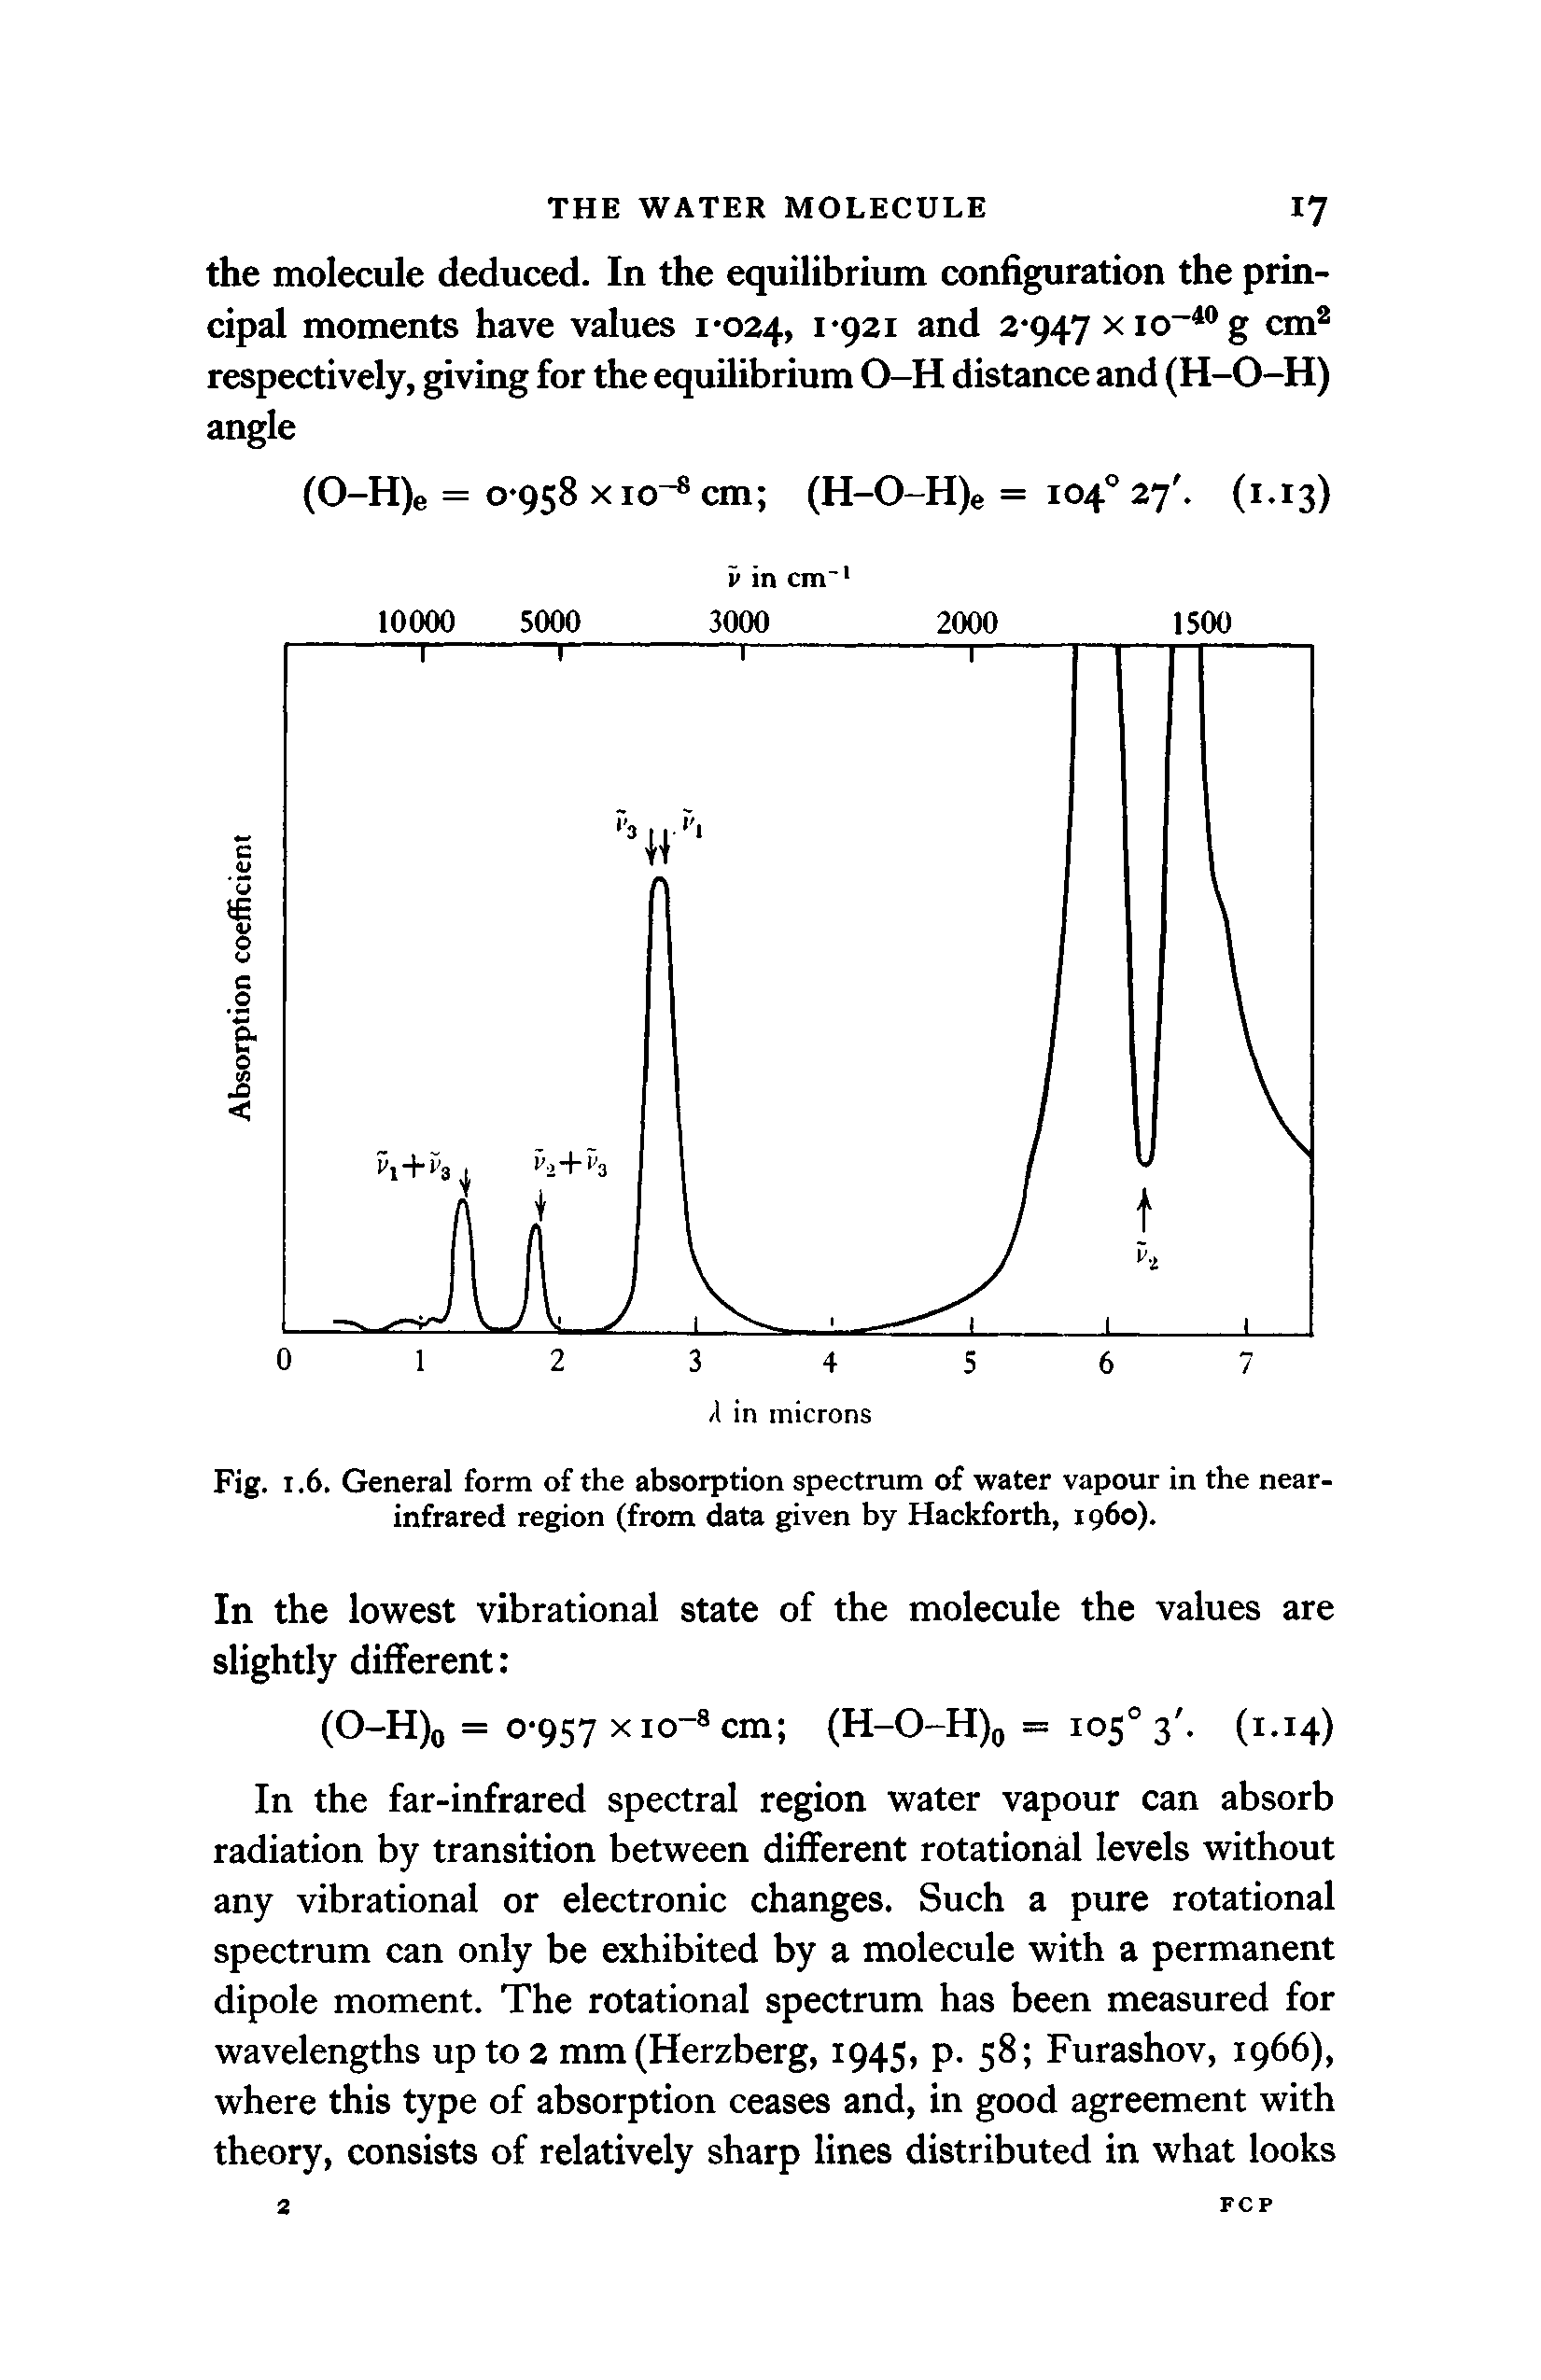 Fig. 1.6. General form of the absorption spectrum of water vapour in the near-infrared region (from data given by Hackforth, i960).